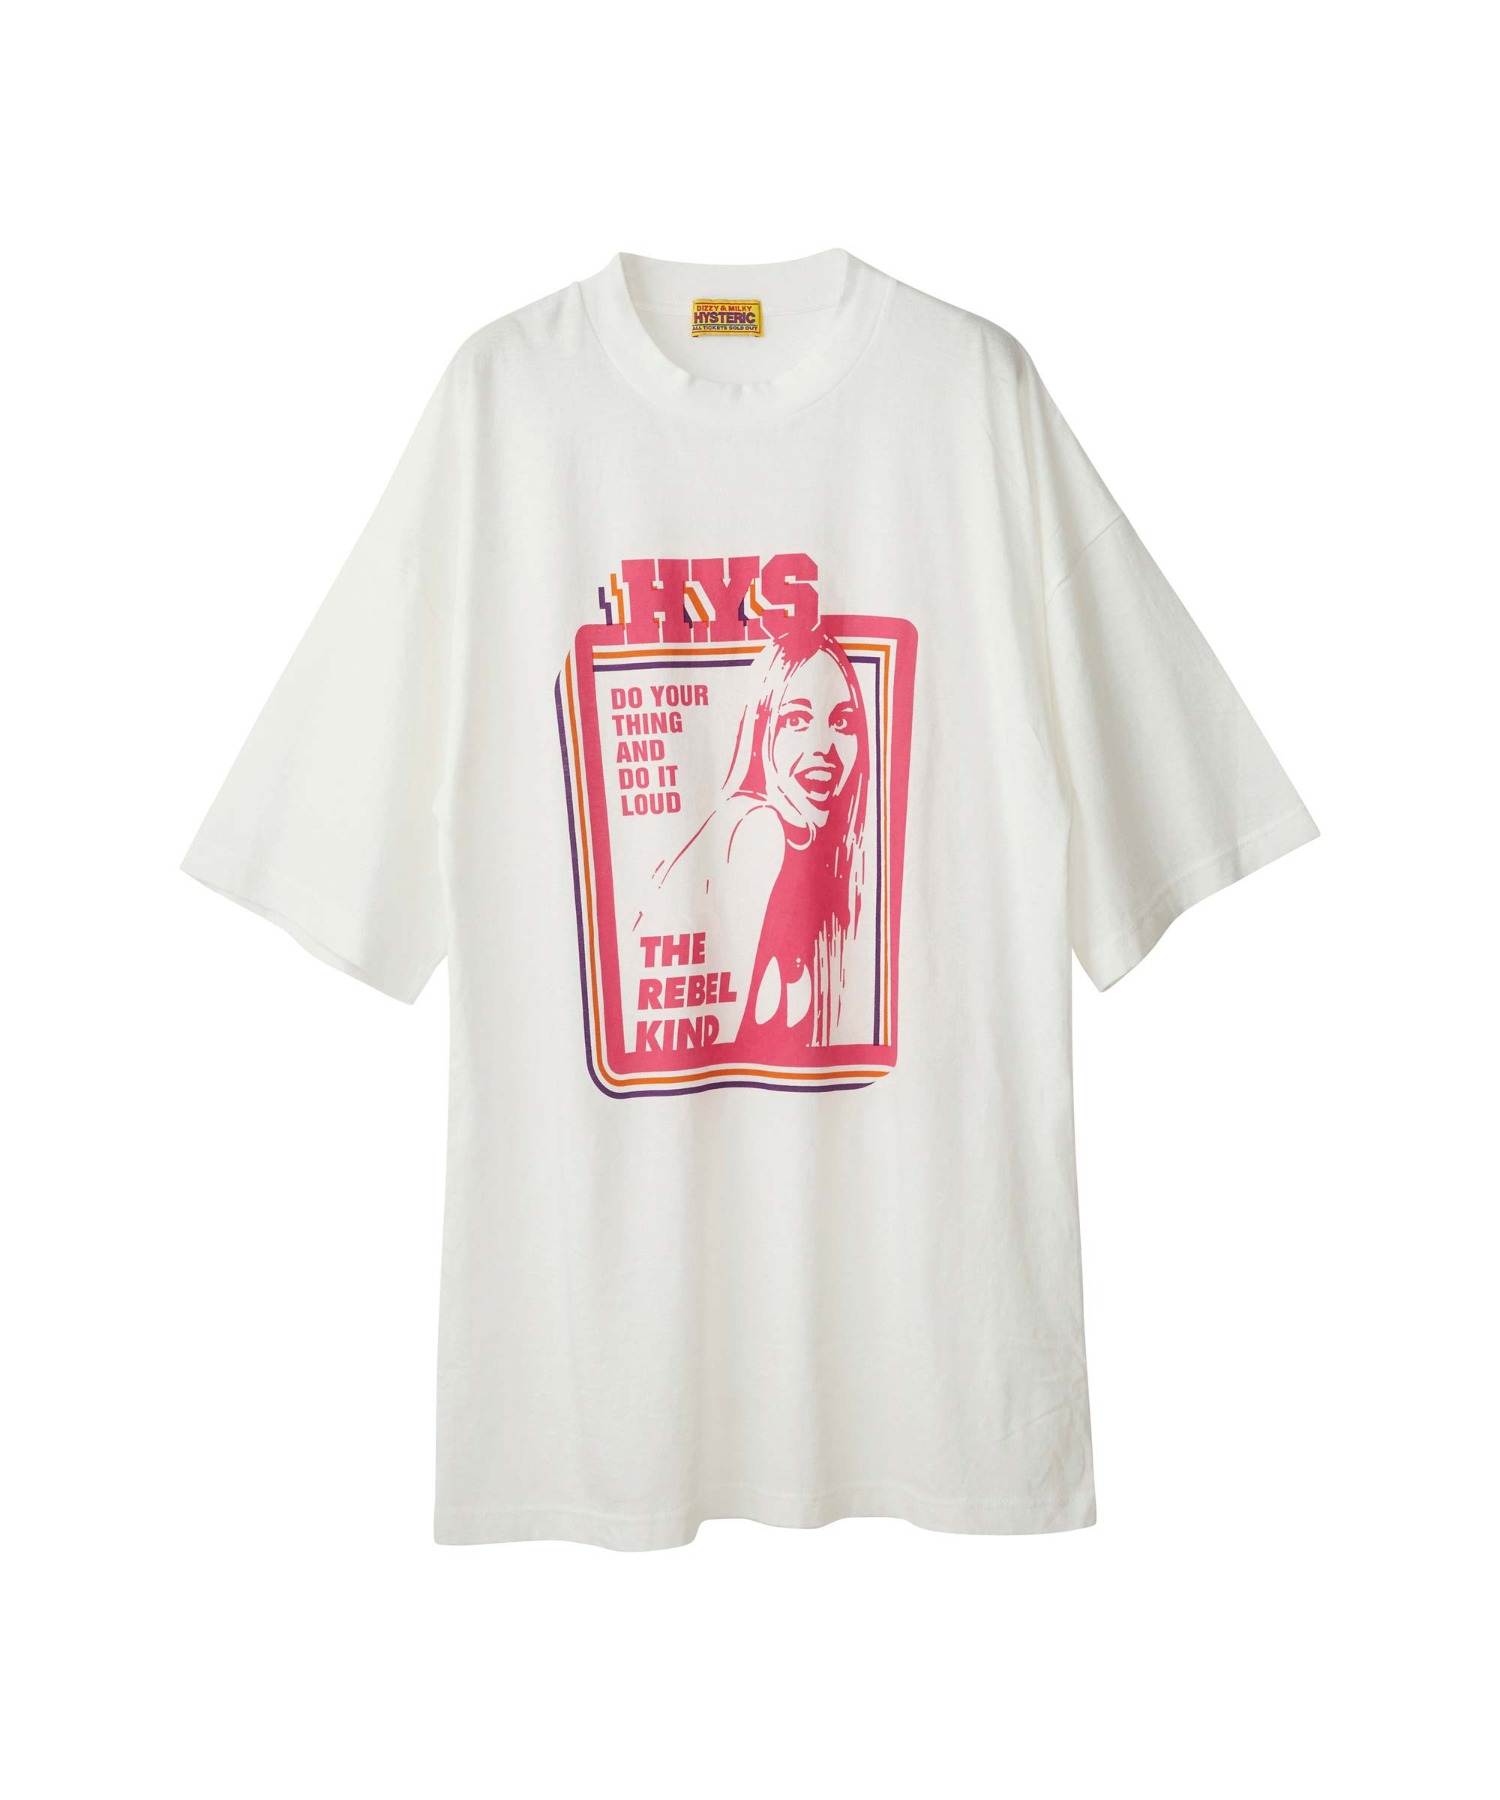 THE REBEL KIND ワンピース HYSTERIC GLAMOUR WOMEN│HYSTERIC GLAMOUR ONLINE STORE  ヒステリックグラマーオンラインストア